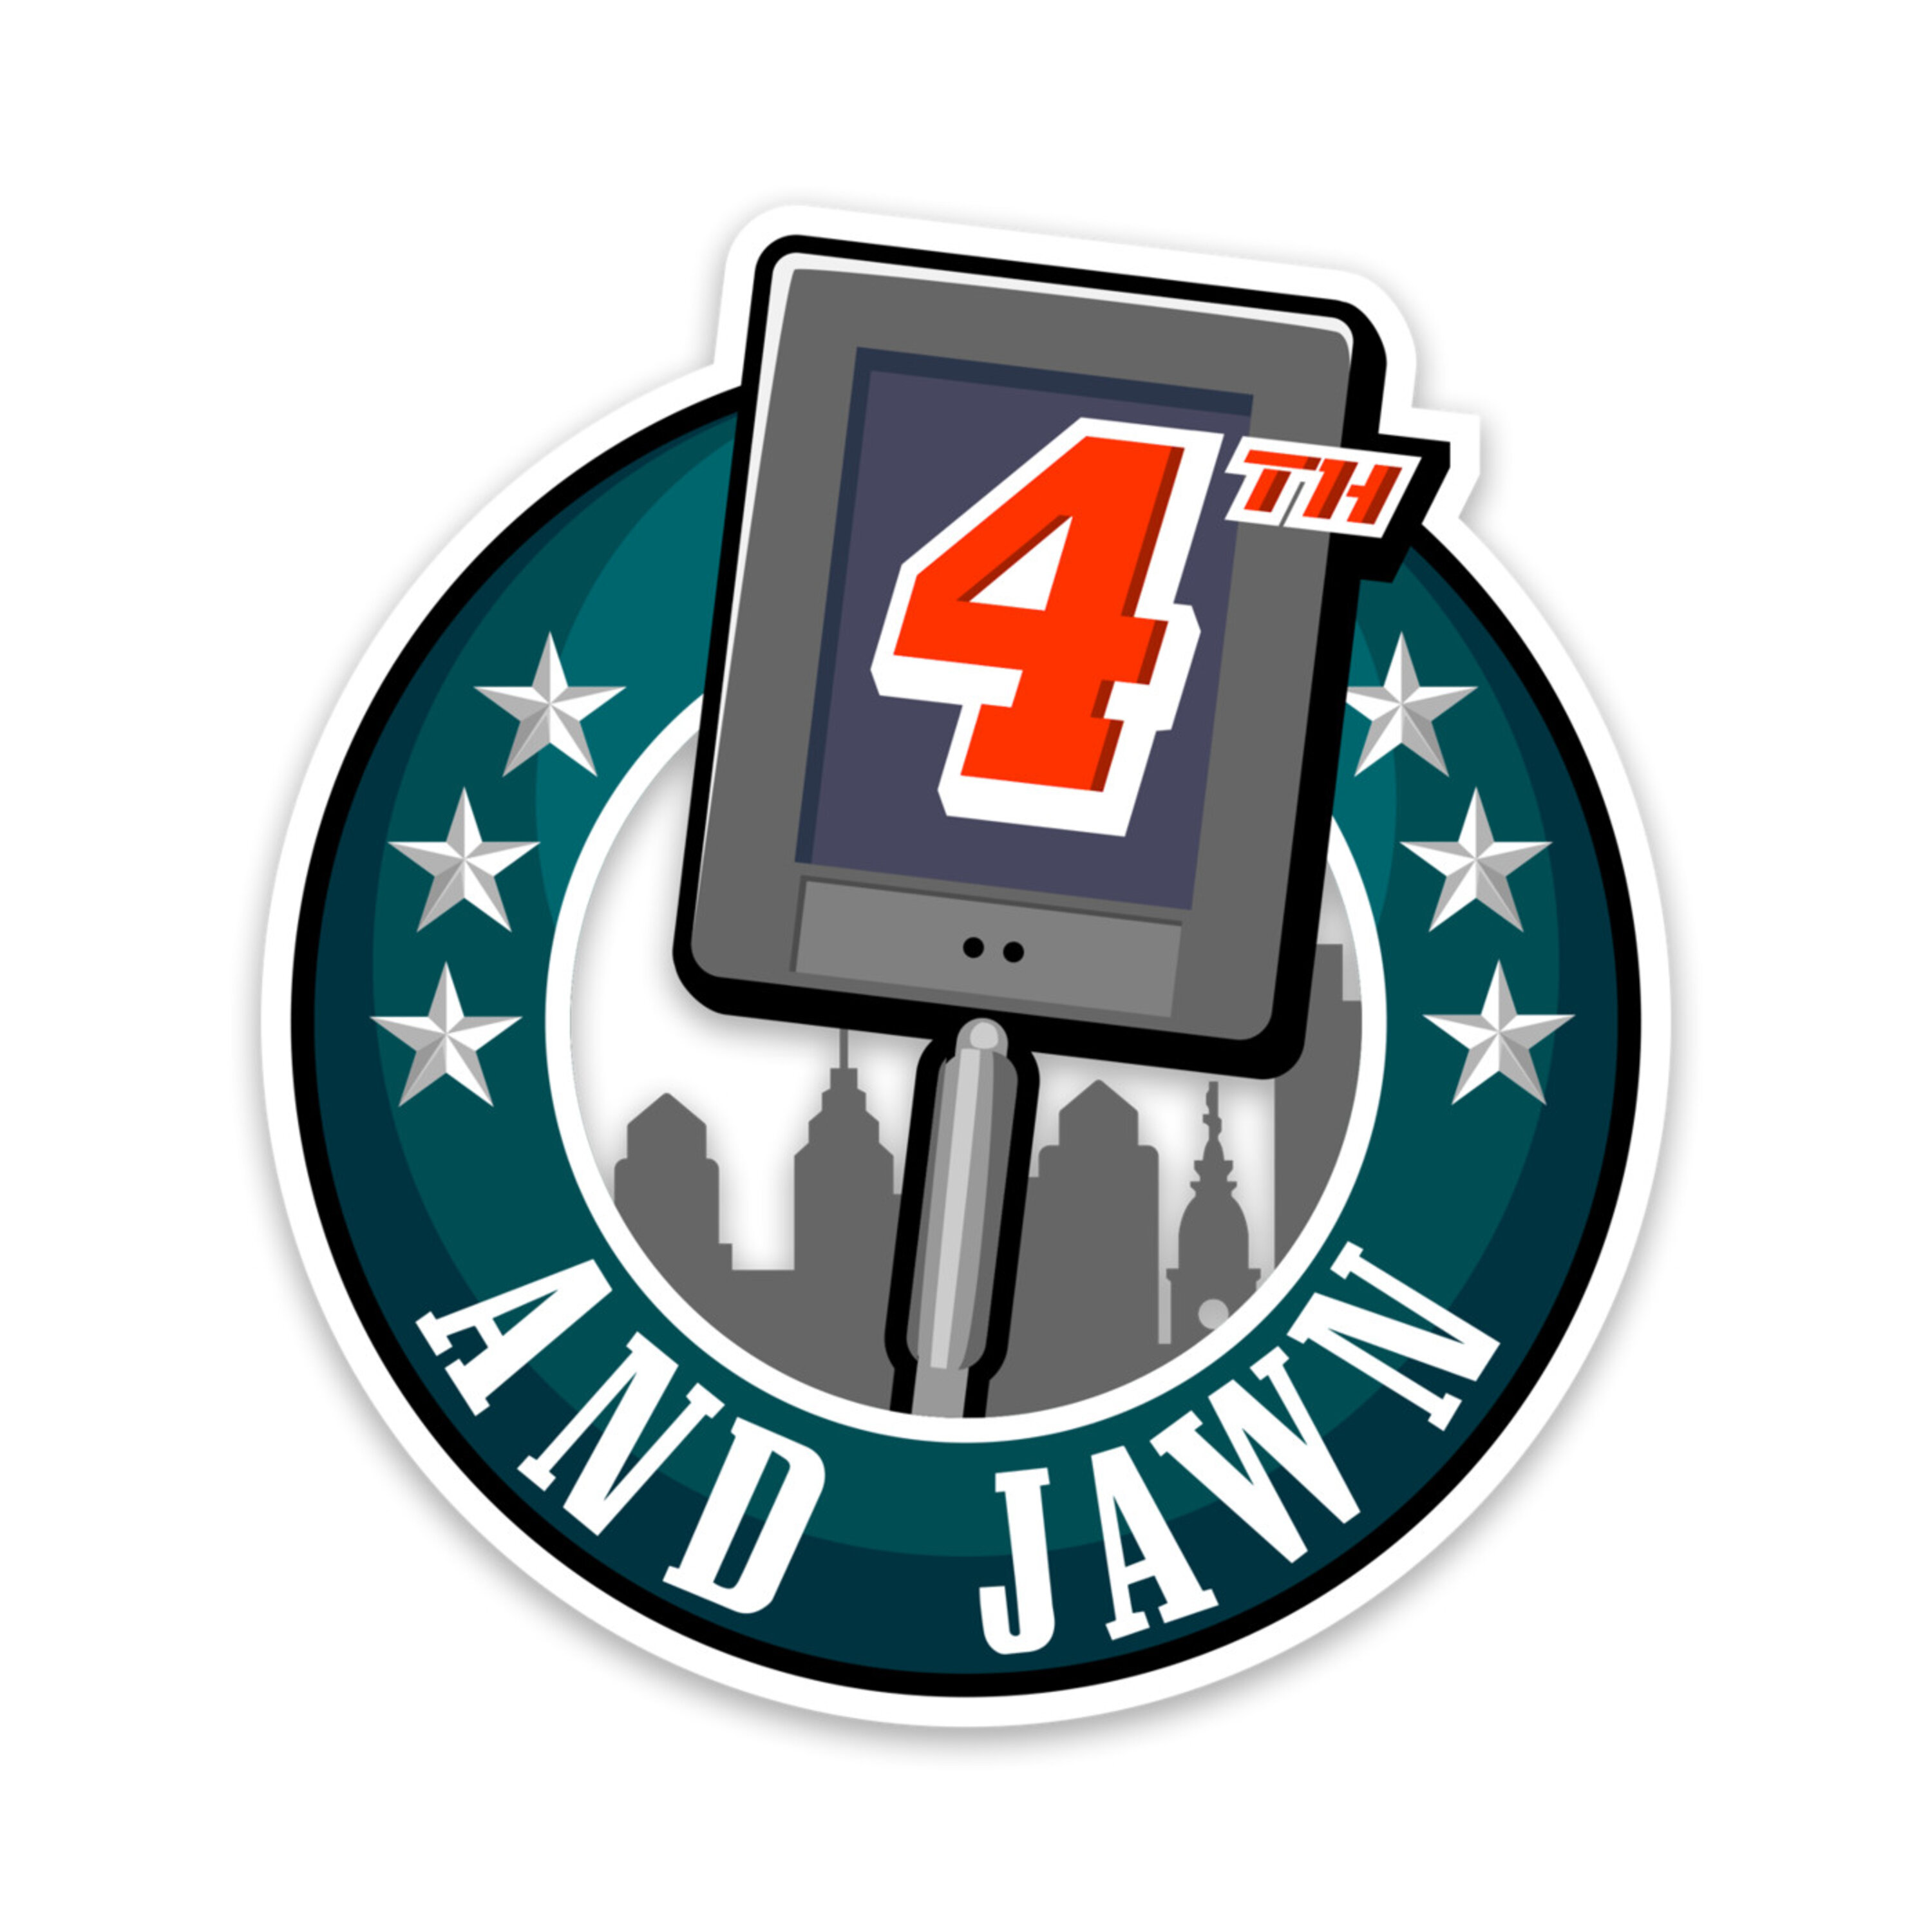 4th and Jawn - Episode 218 - Day 3 Check In